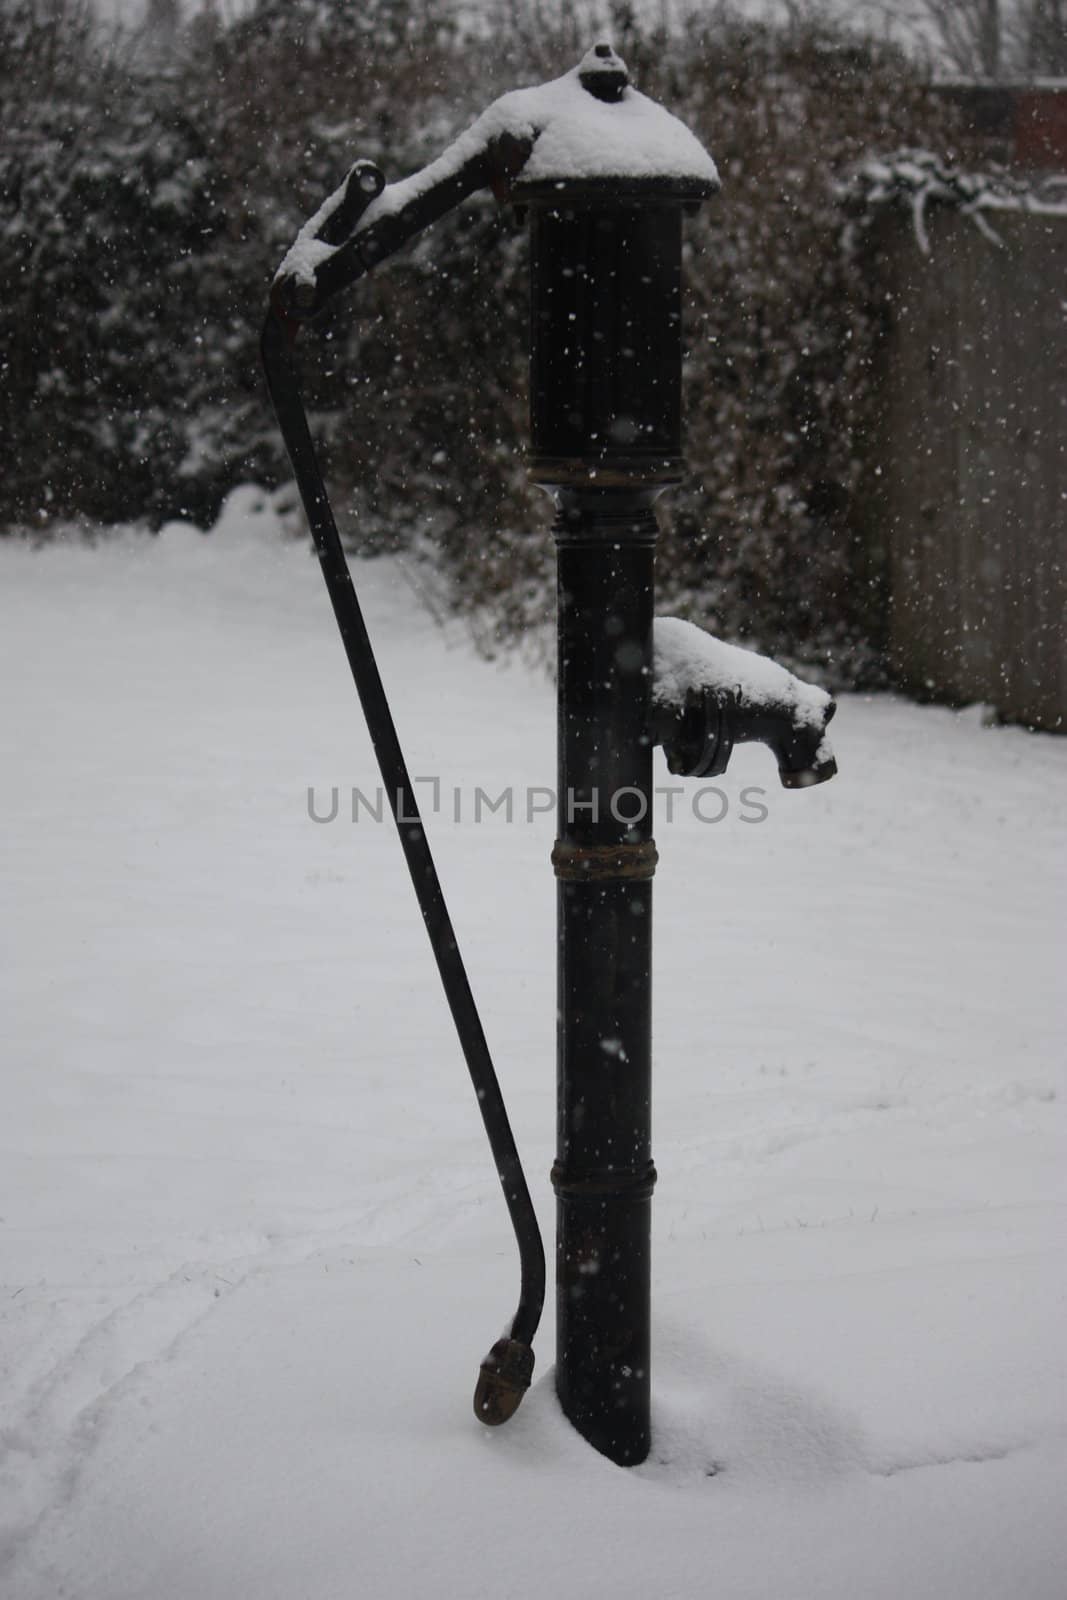 A snow covered old fashioned water pump